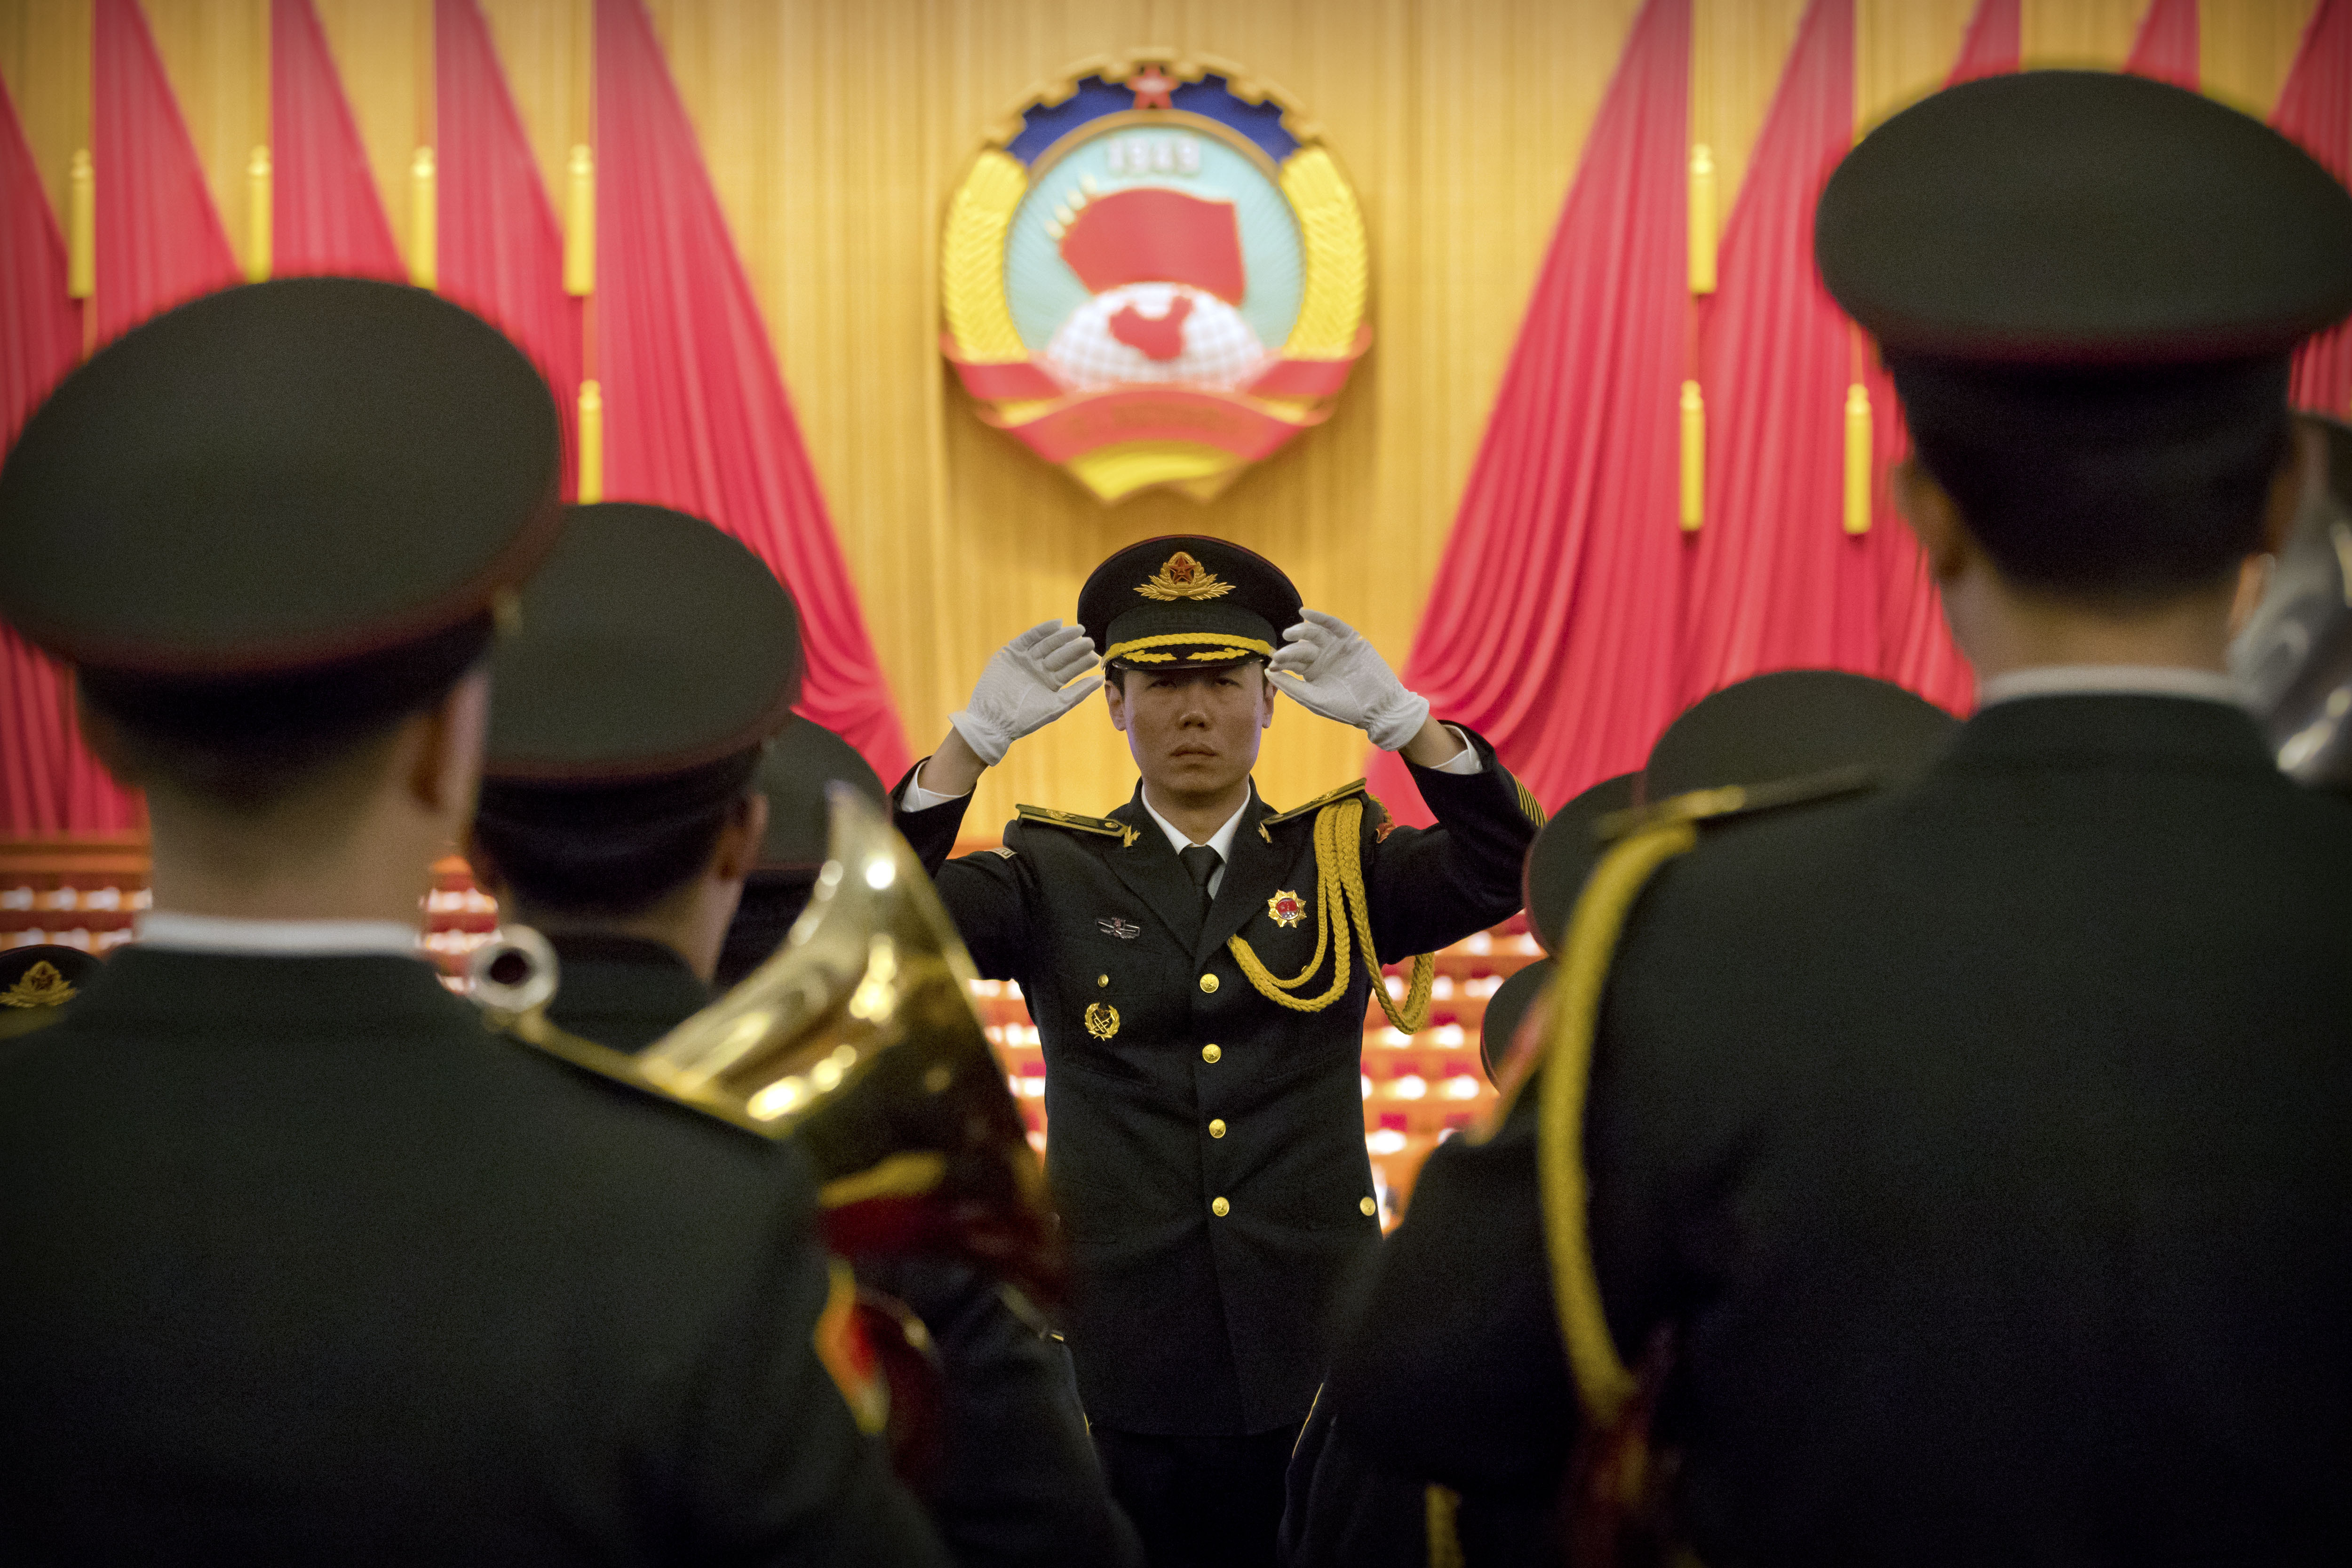 A Chinese military conductor gestures as he instructs his music band members during a rehearsal before the closing session of the Chinese People's Political Consultative Conference (CPPCC) at the Great Hall of the People in Beijing, Wednesday, March 13, 2019. (AP Photo/Mark Schiefelbein)